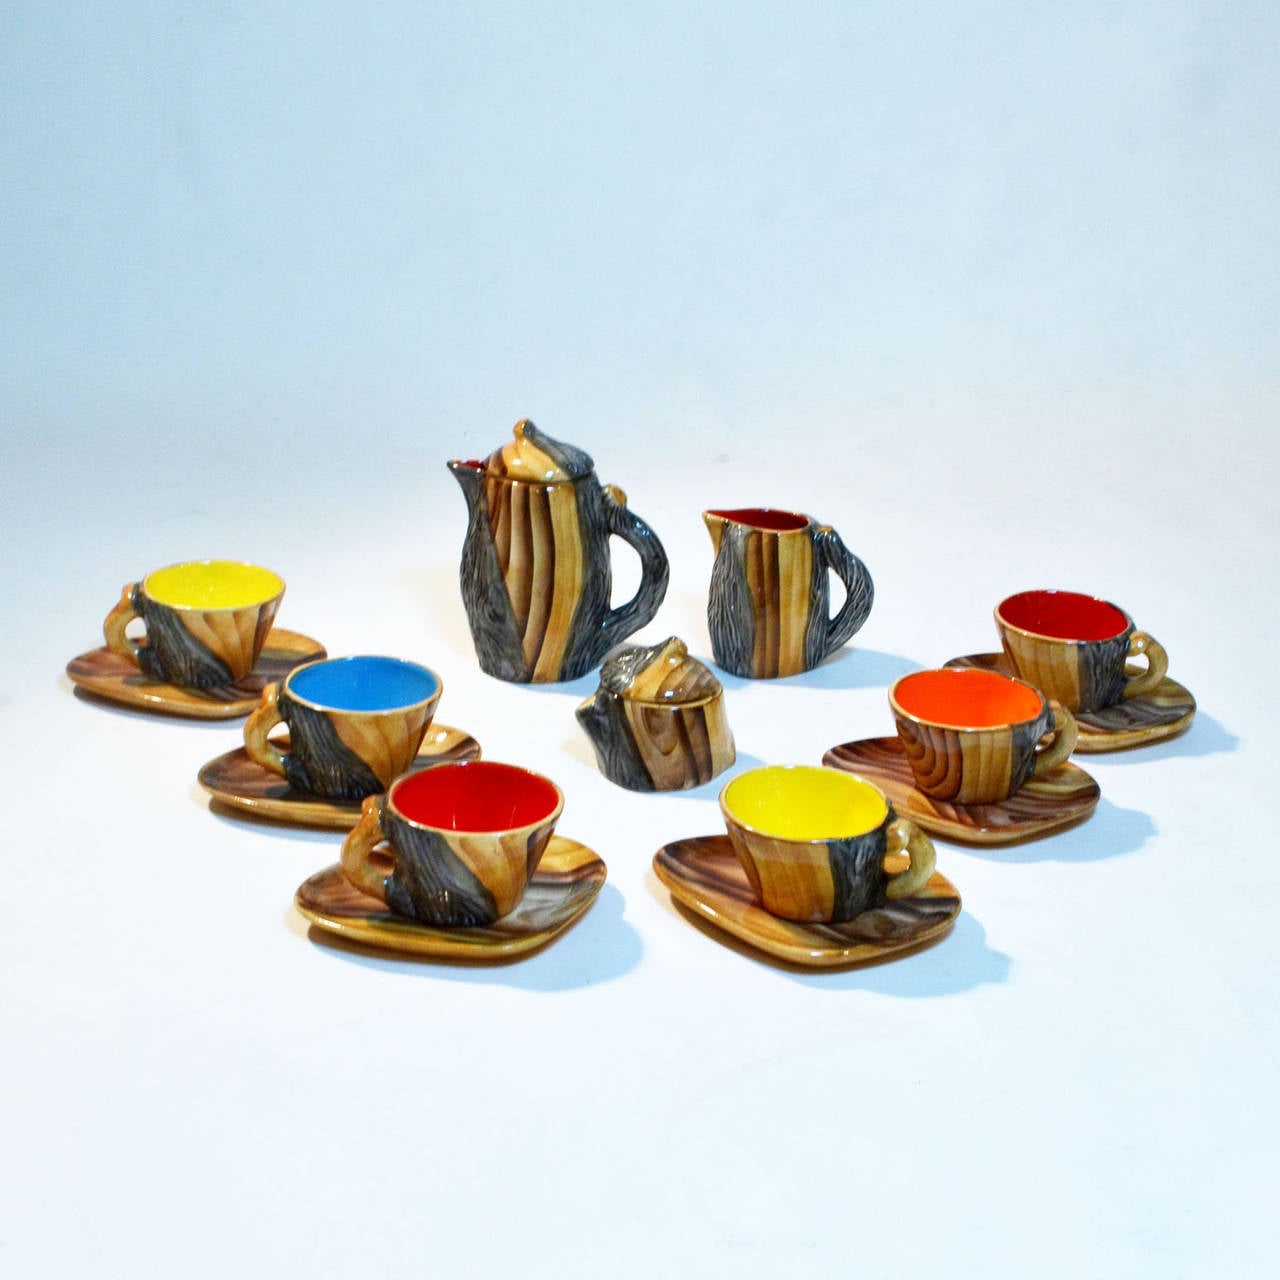 Complete set of Grandjean-Jourdan’s faux bois tableware.
This father and son team of post-WWII regional artists created their hand-painted pottery in the famed town of Vallauris, the same area where Braque’s and Pablo Picasso produced their own